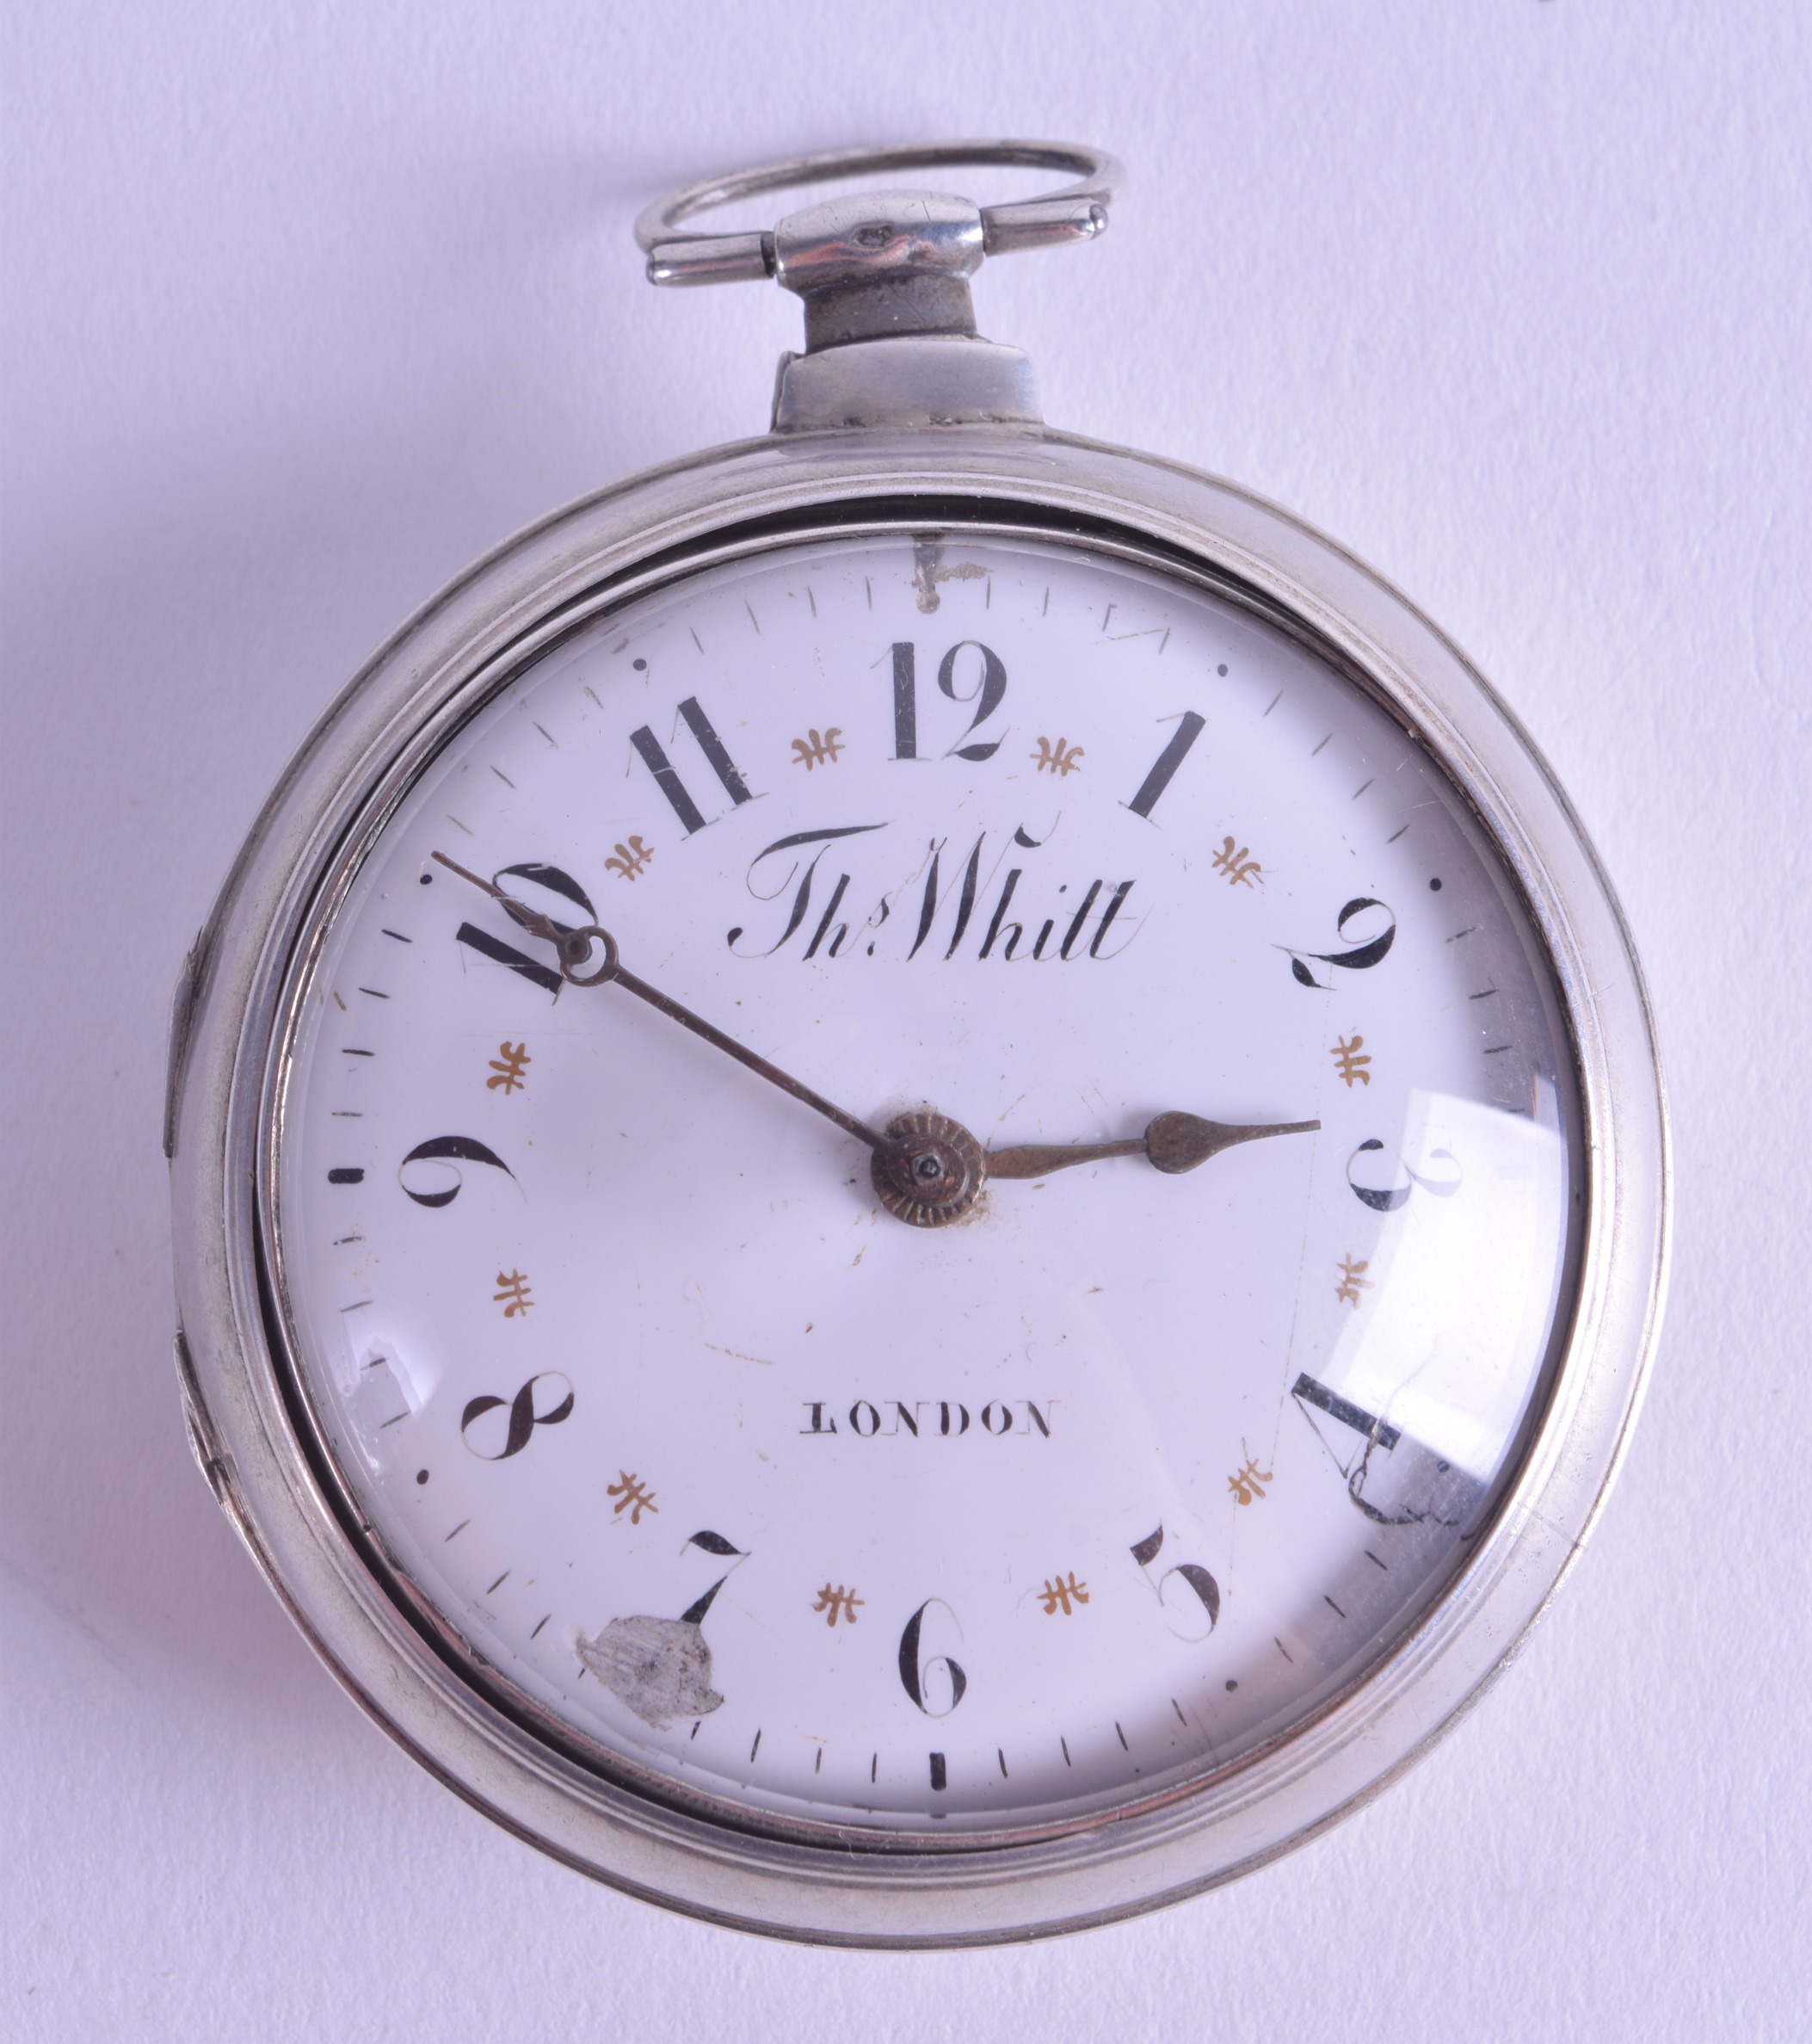 AN EARLY 19TH CENTURY PEAR CASED SILVER POCKET WATCH by Thomas Whitt of London, the enamel dial with